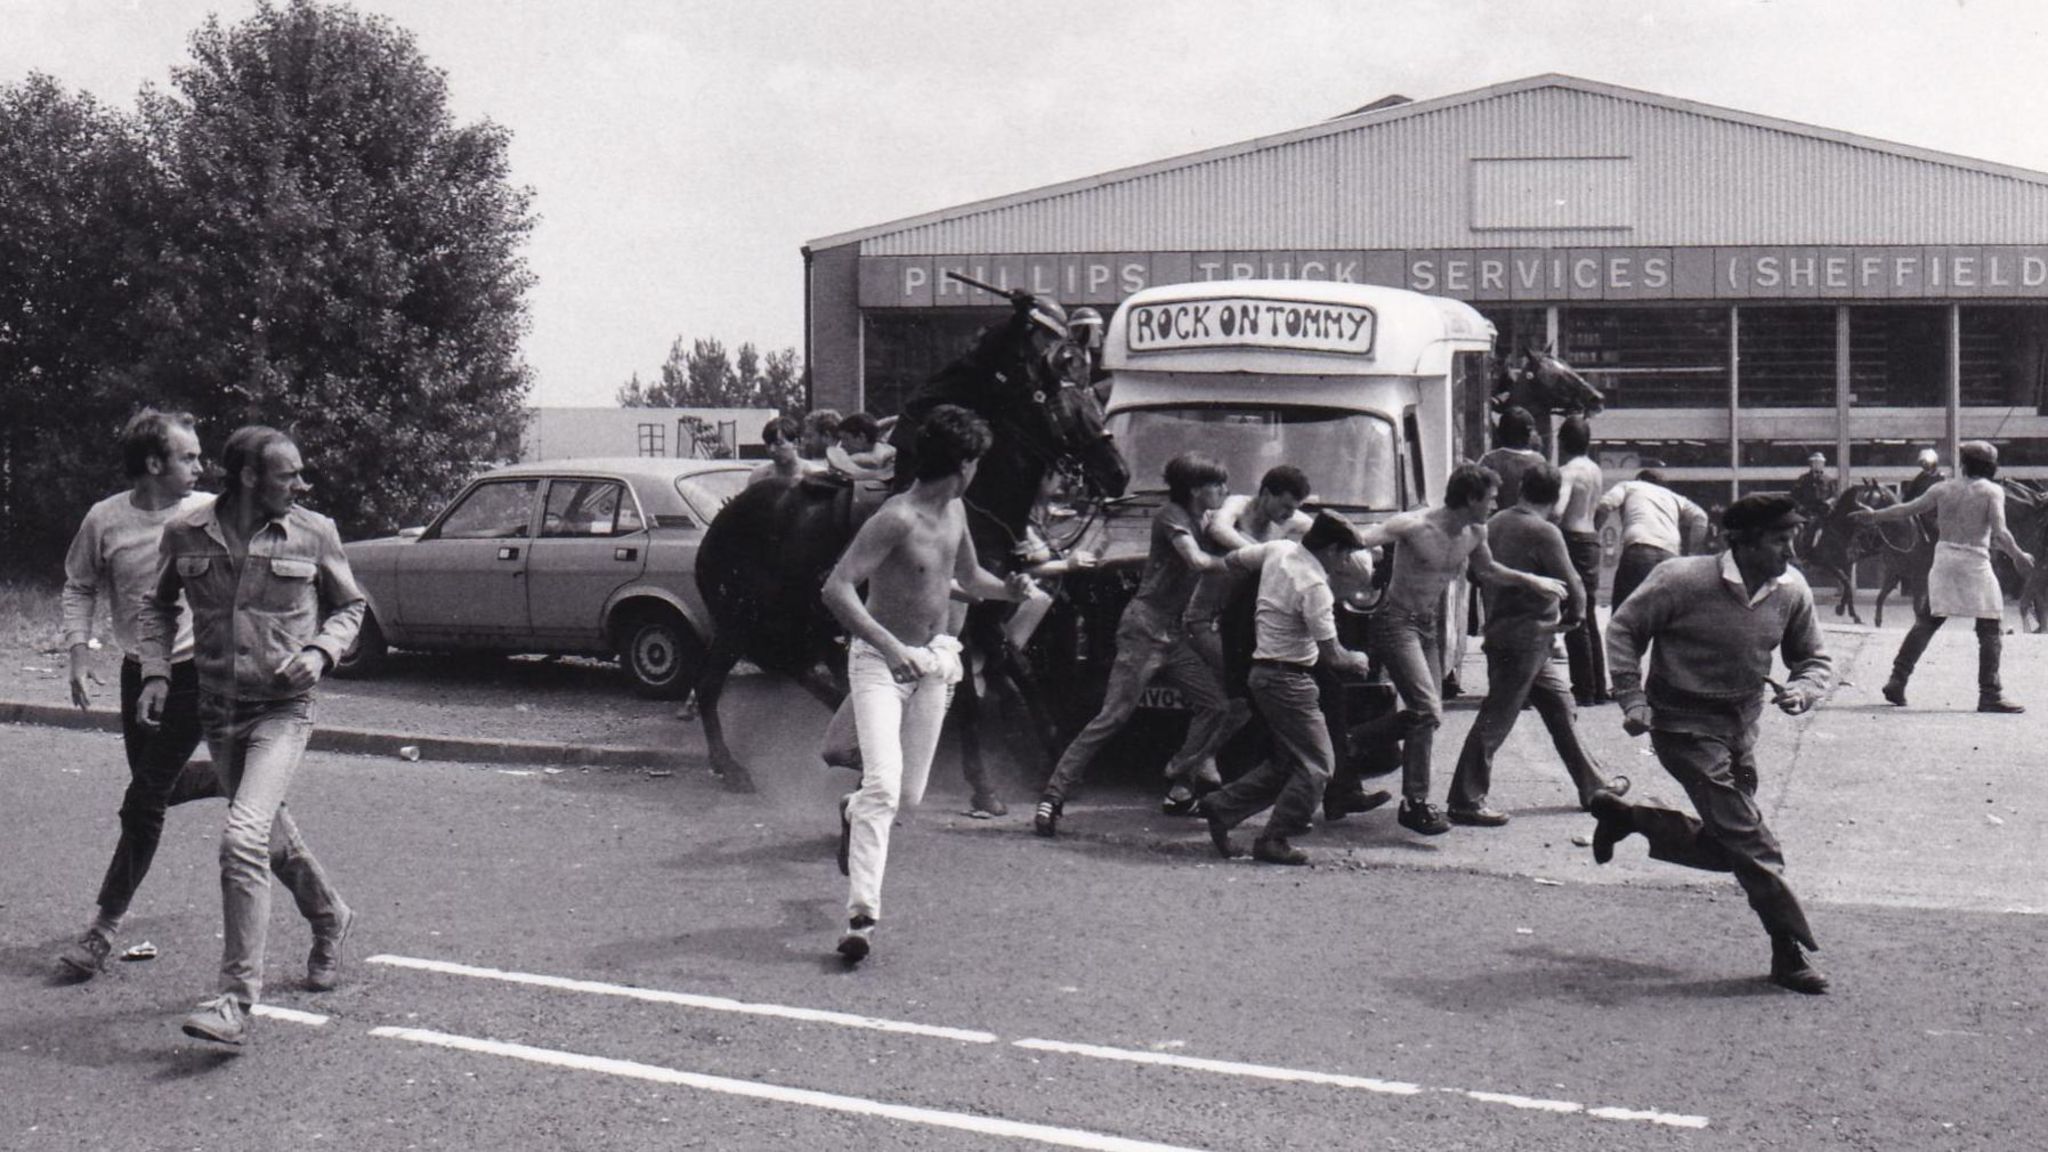 Mounted police charge picketers in Orgreave on 18 June 1984